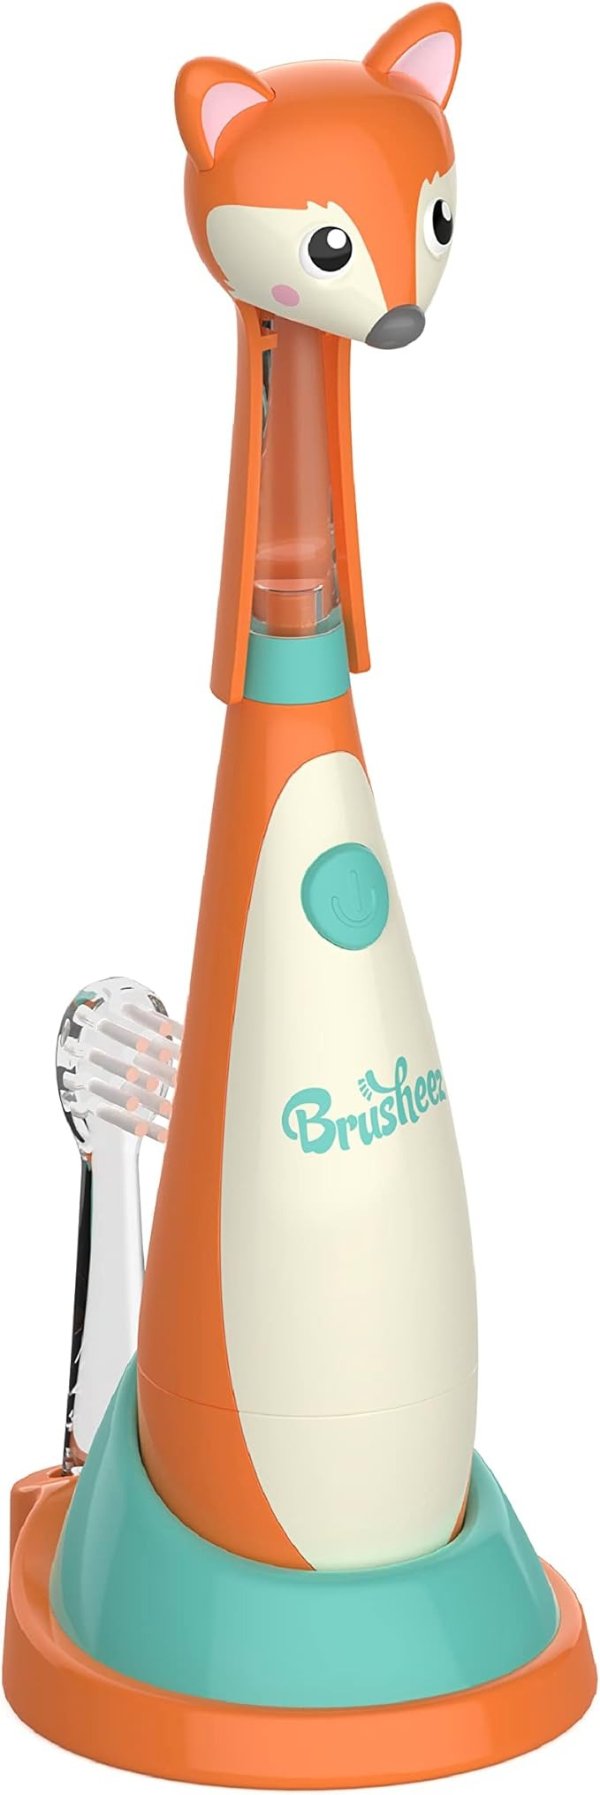 Little Toddlers Sonic Toothbrush - Safe & Gentle Toothbrush for Ages 1-3 with Built-in, Light-Up 2-Minute Timer, Extra Brush Head, & Storage Base for First-Time Brushers (Fuzzy The Fox)